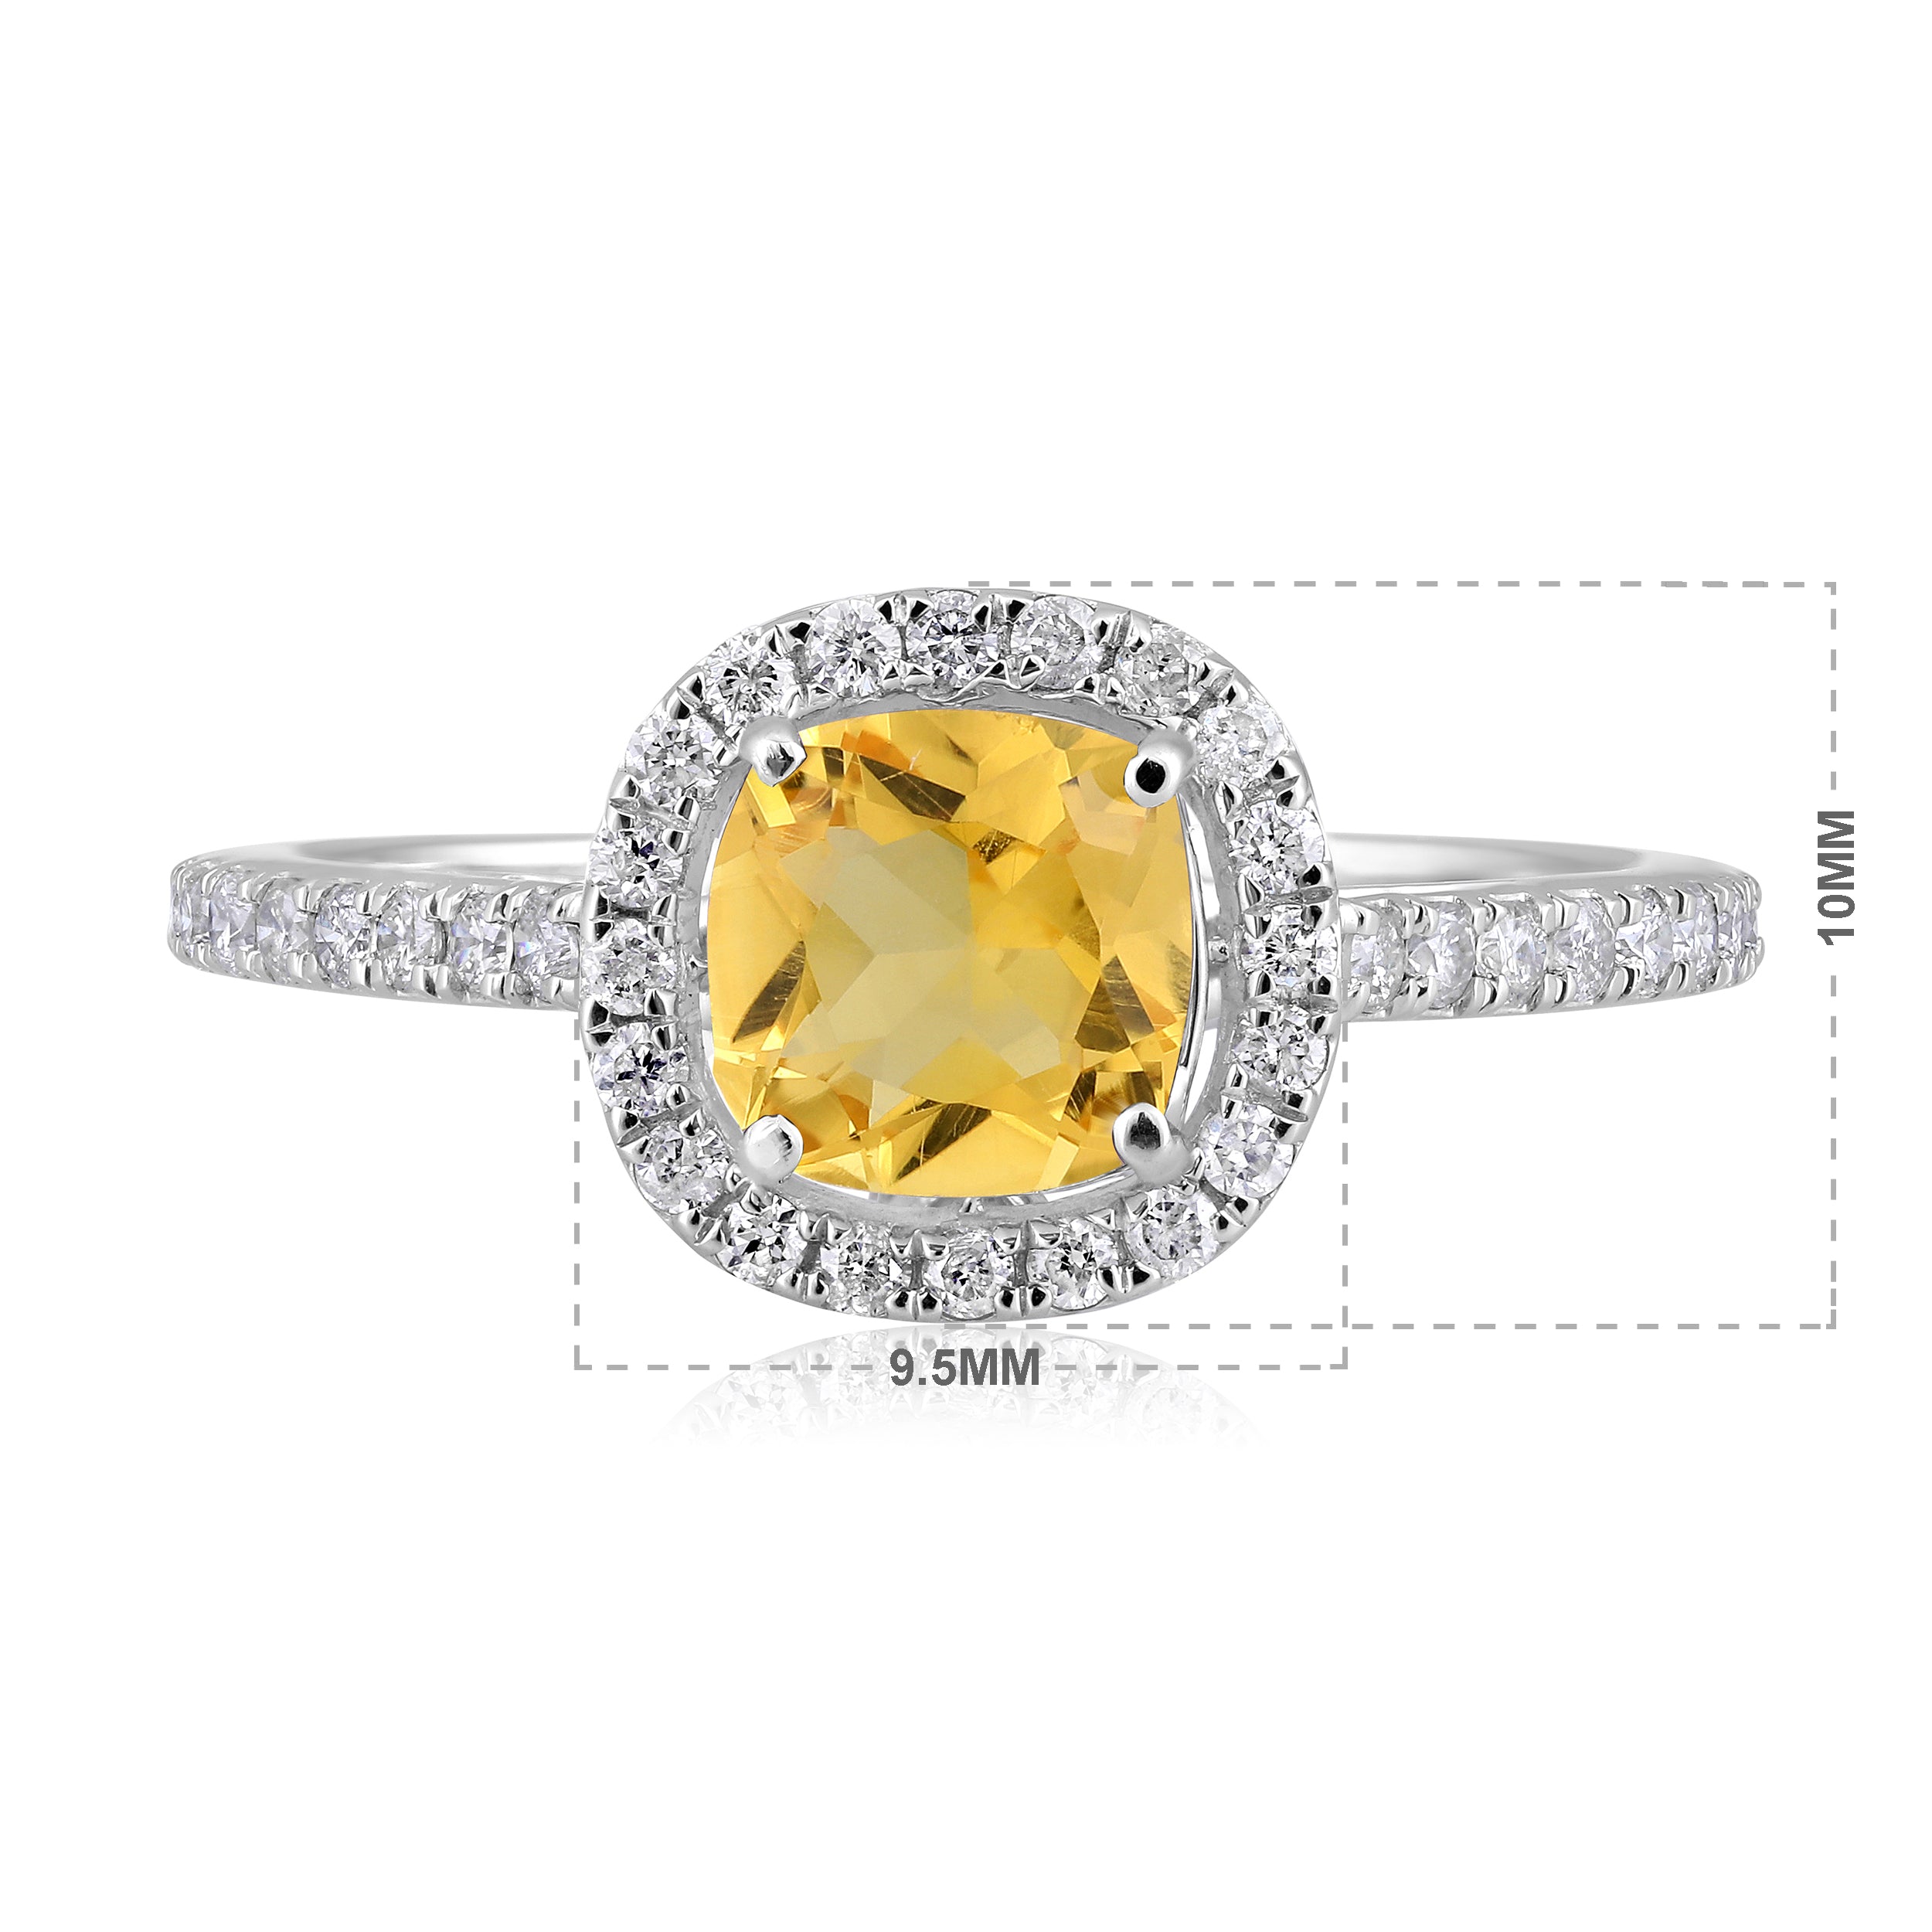 Certified 10K Gold 1.3ct Natural Diamond w/ Simulated Citrine Cushion White Ring